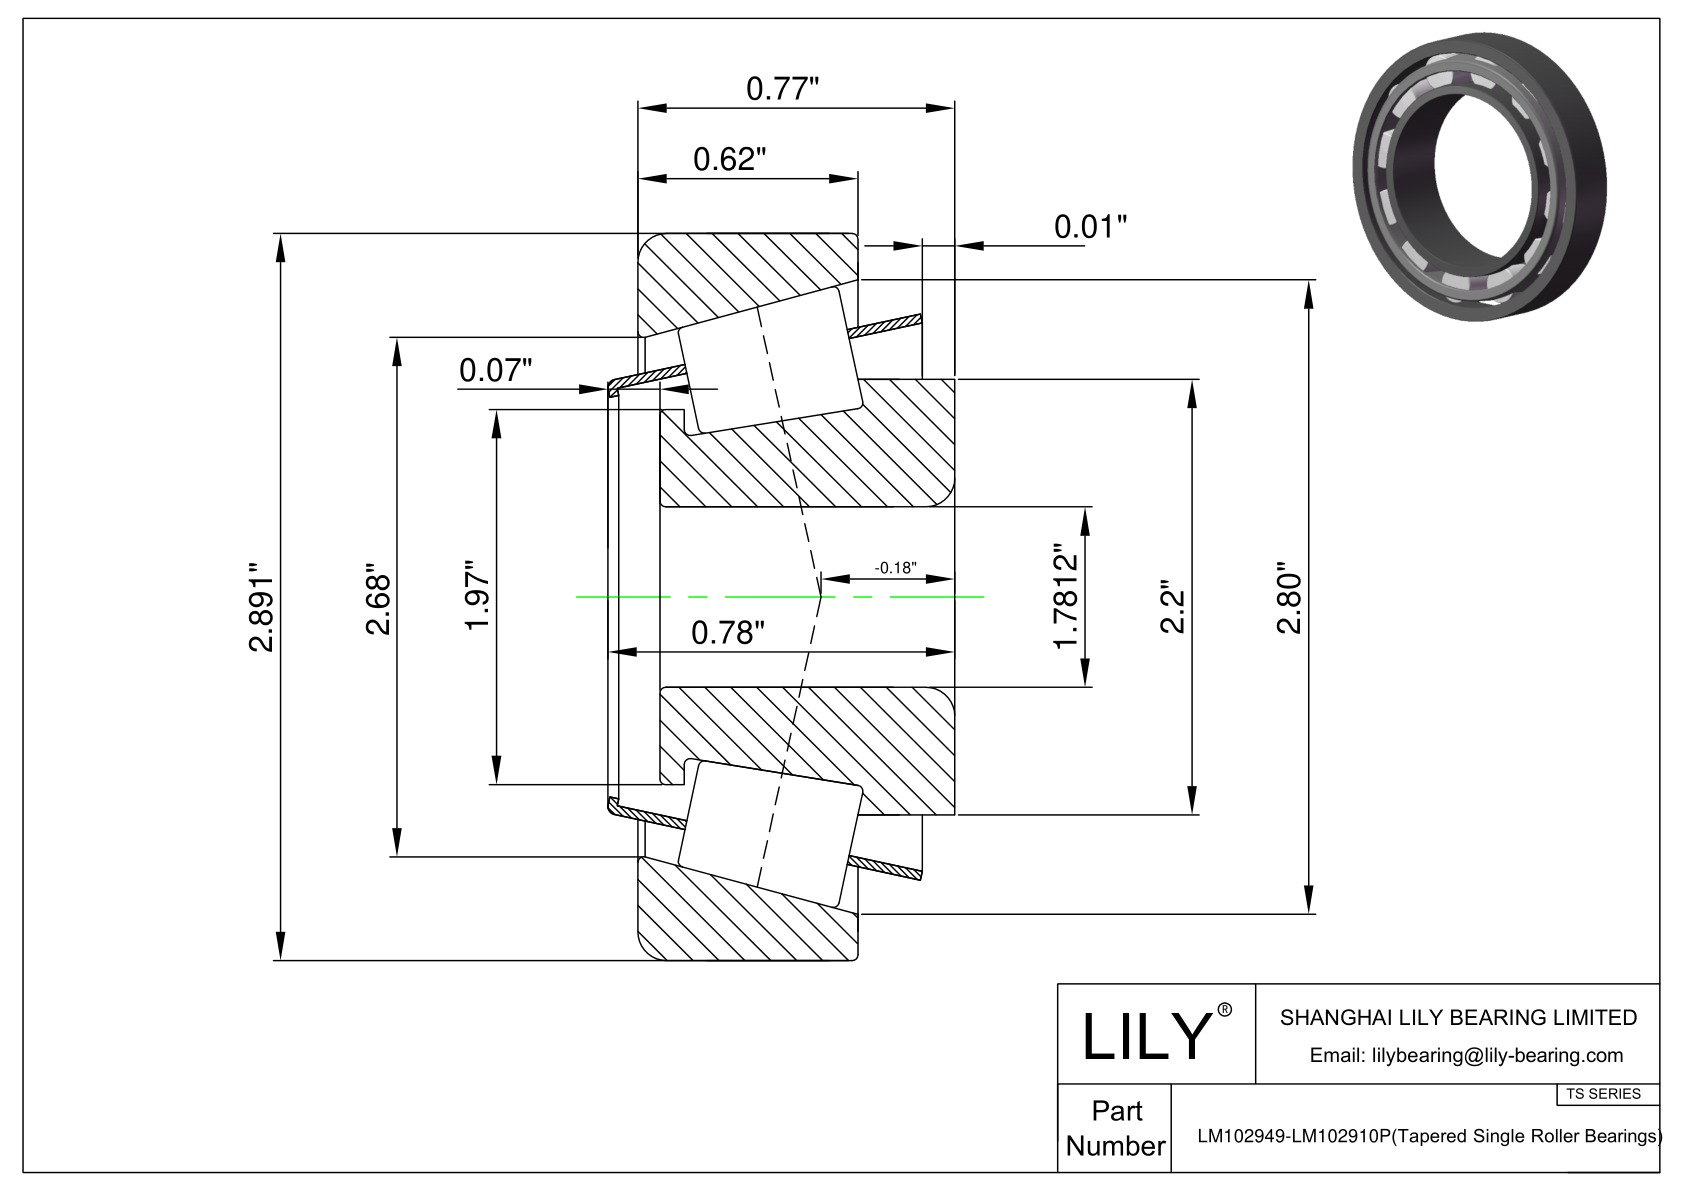 LM102949-LM102910P TS (Tapered Single Roller Bearings) (Imperial) cad drawing